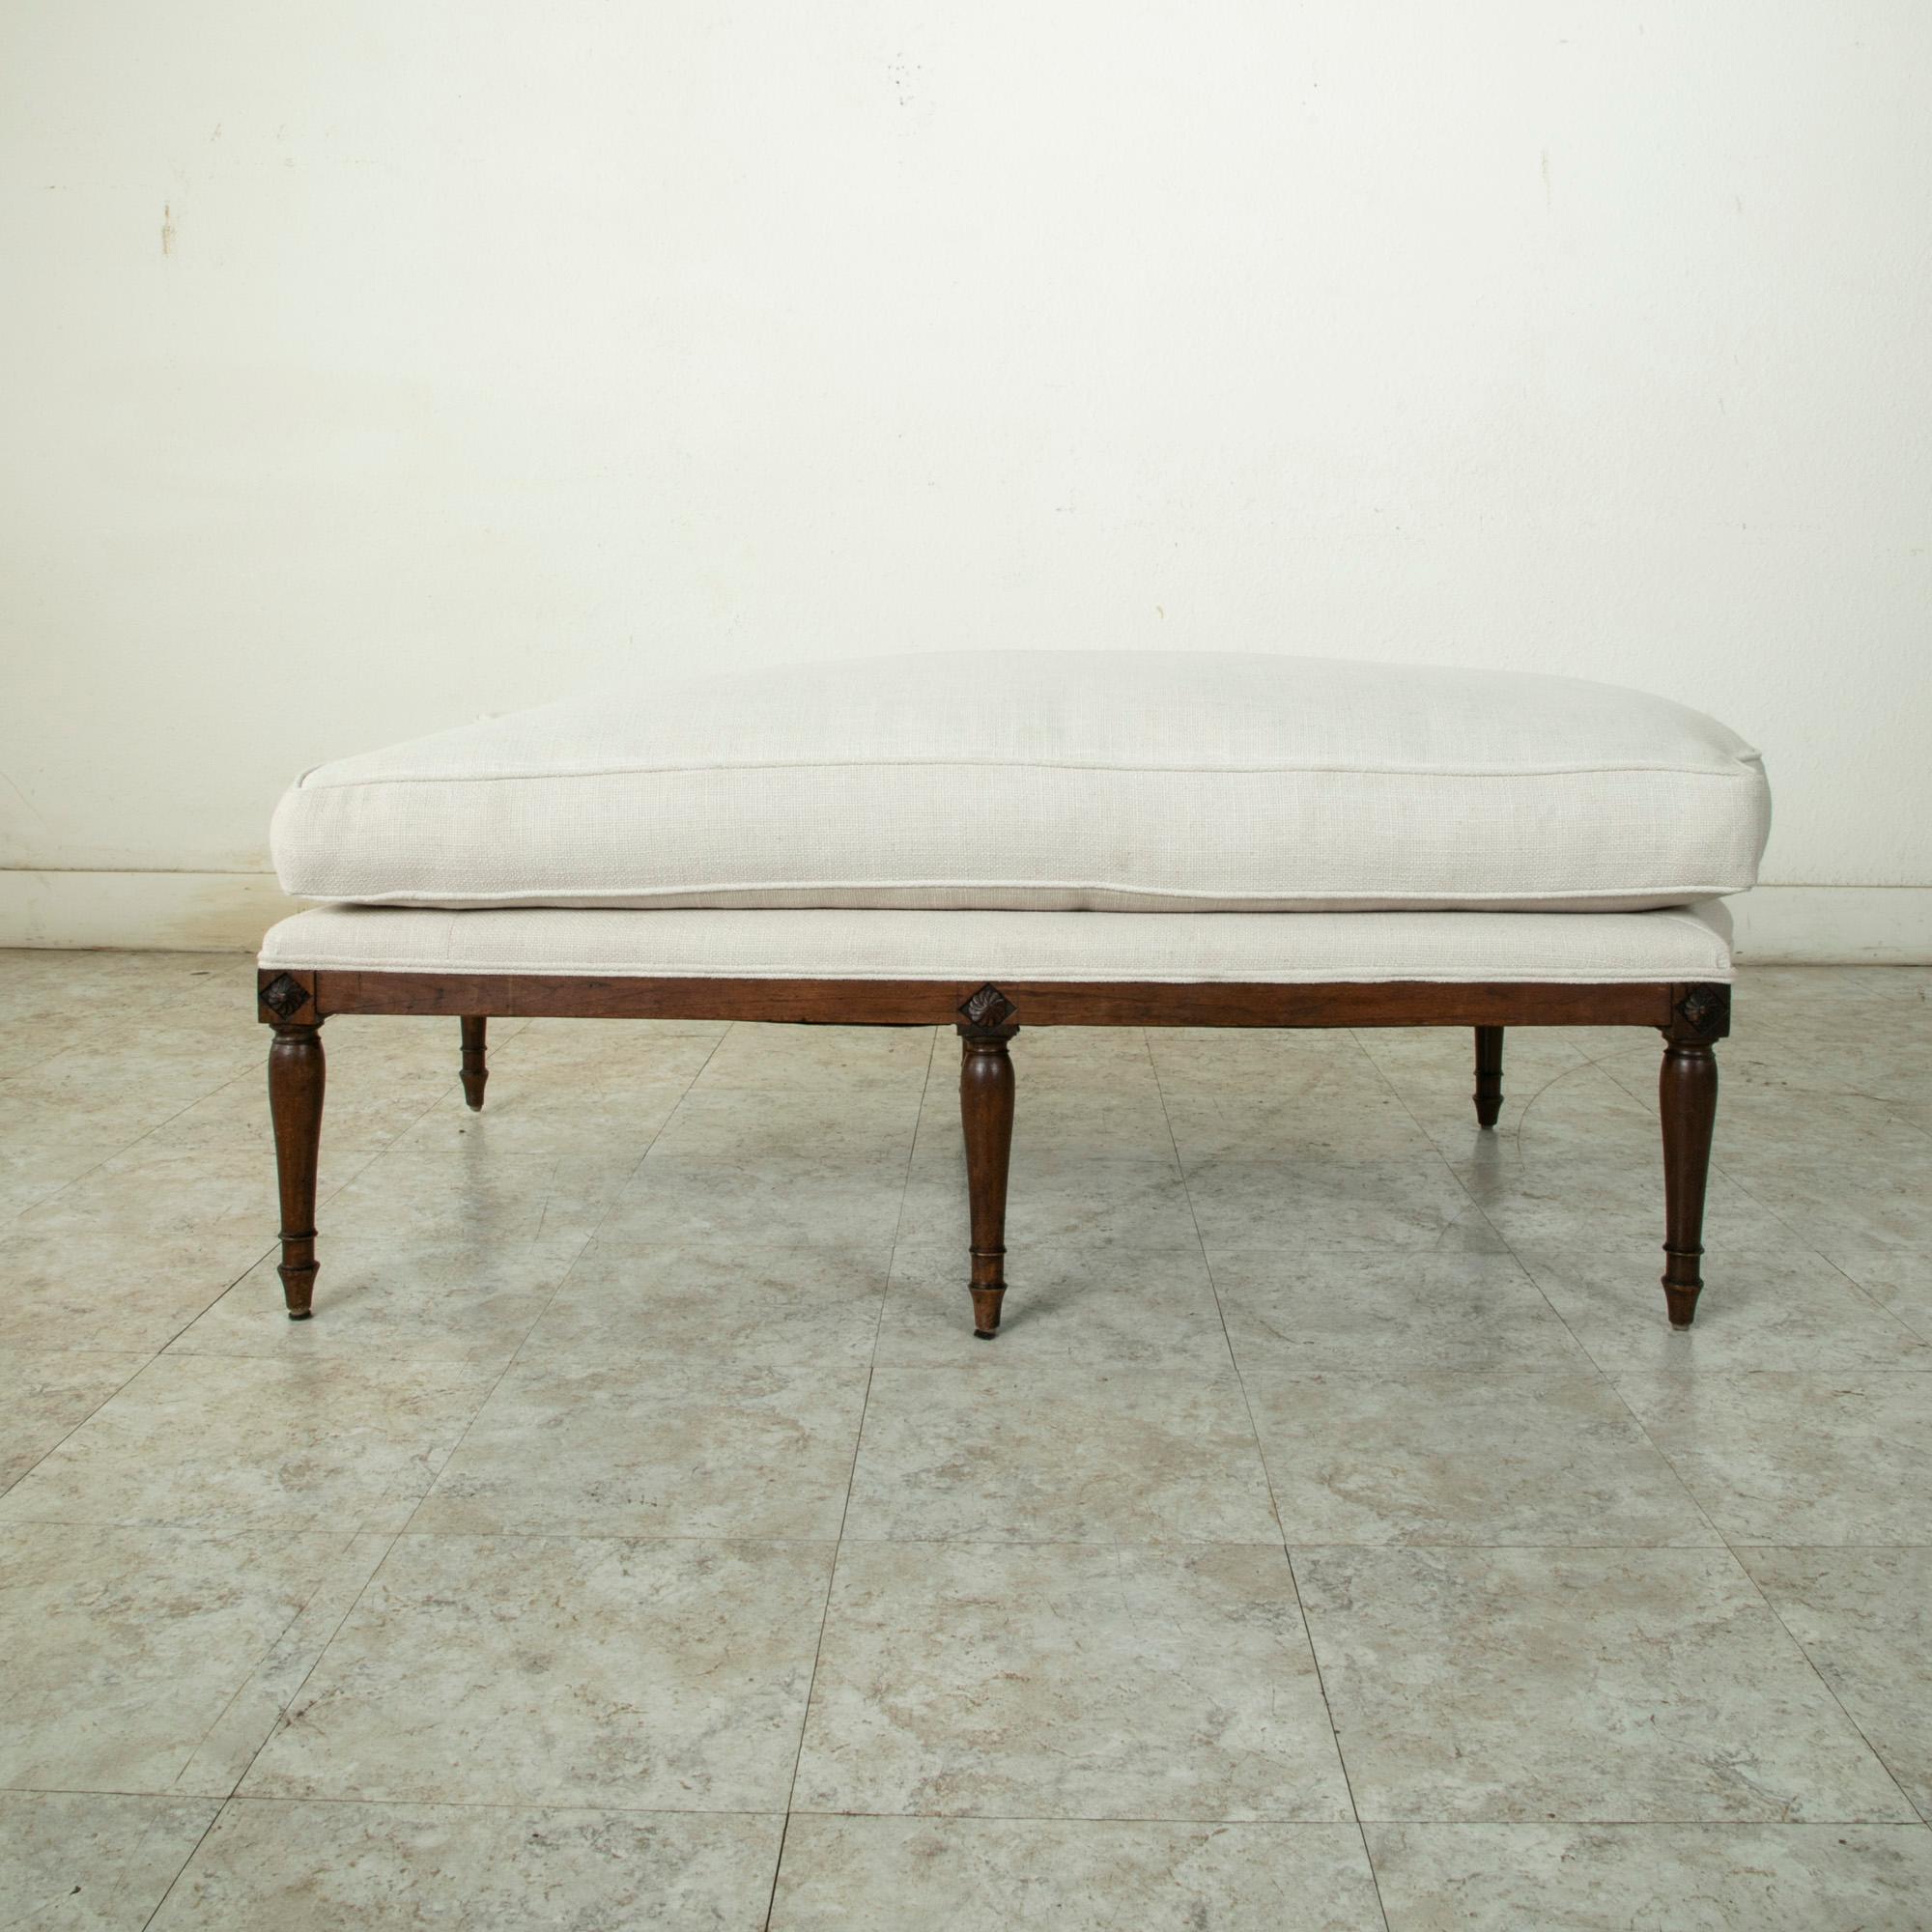 Late 18th Century French Directoire Period Hand Carved Walnut Chaise Longue For Sale 12